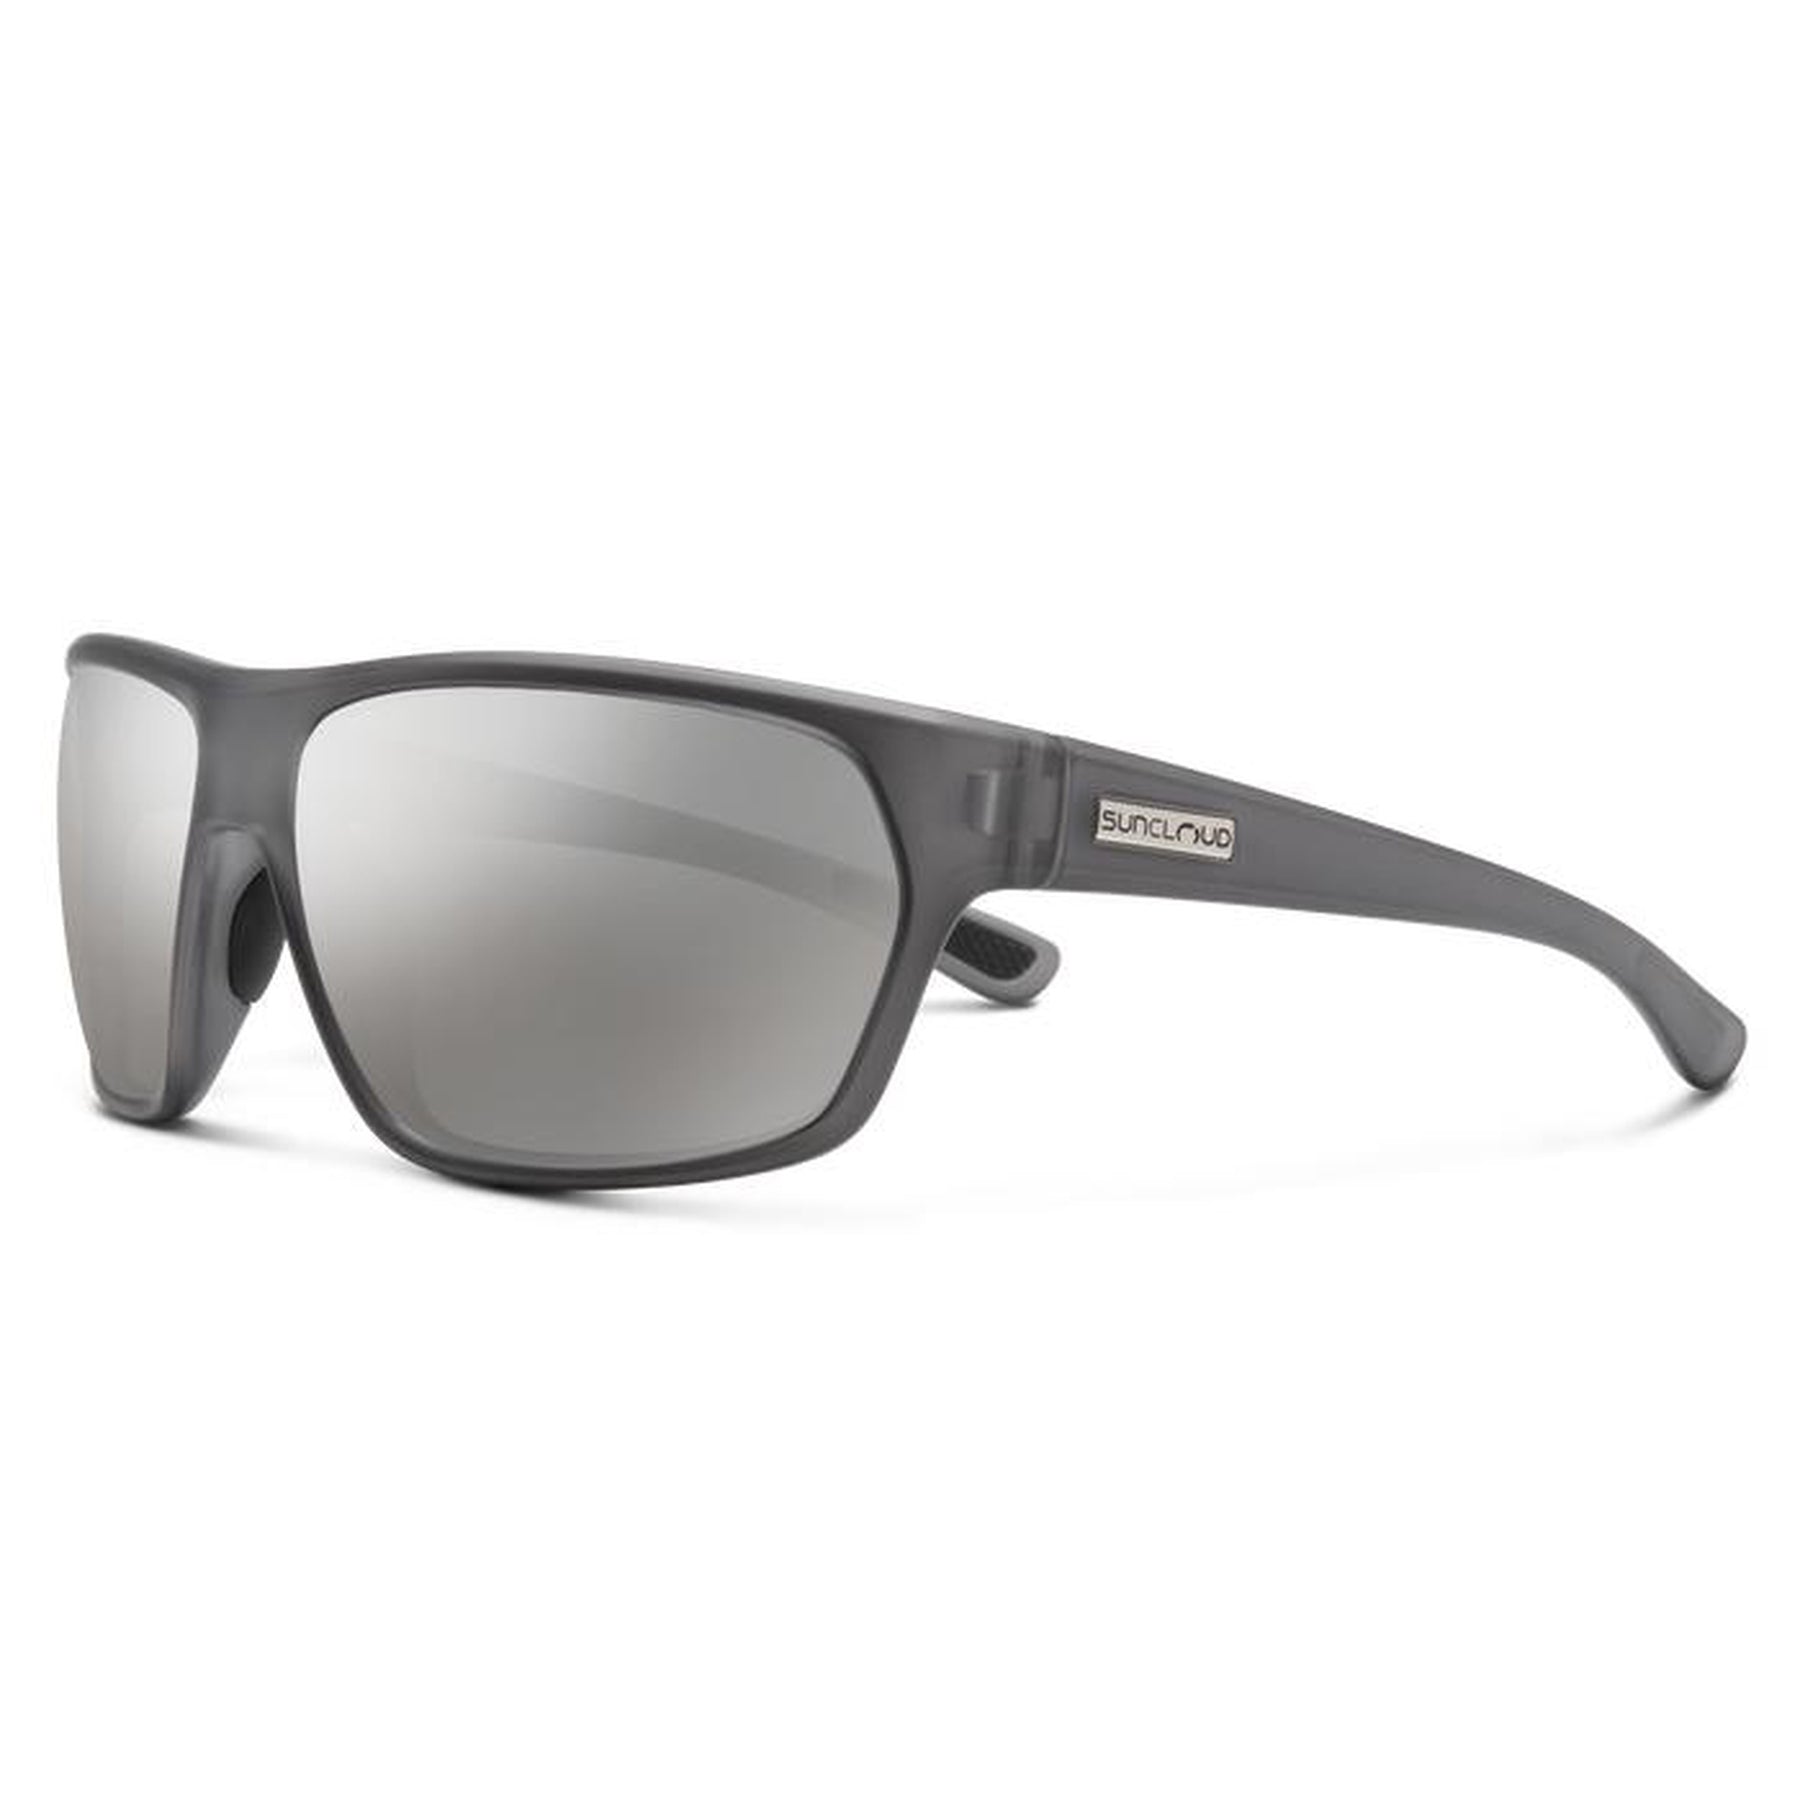 Transparent polarized sunglasses for runners by Tierra Sunglasses